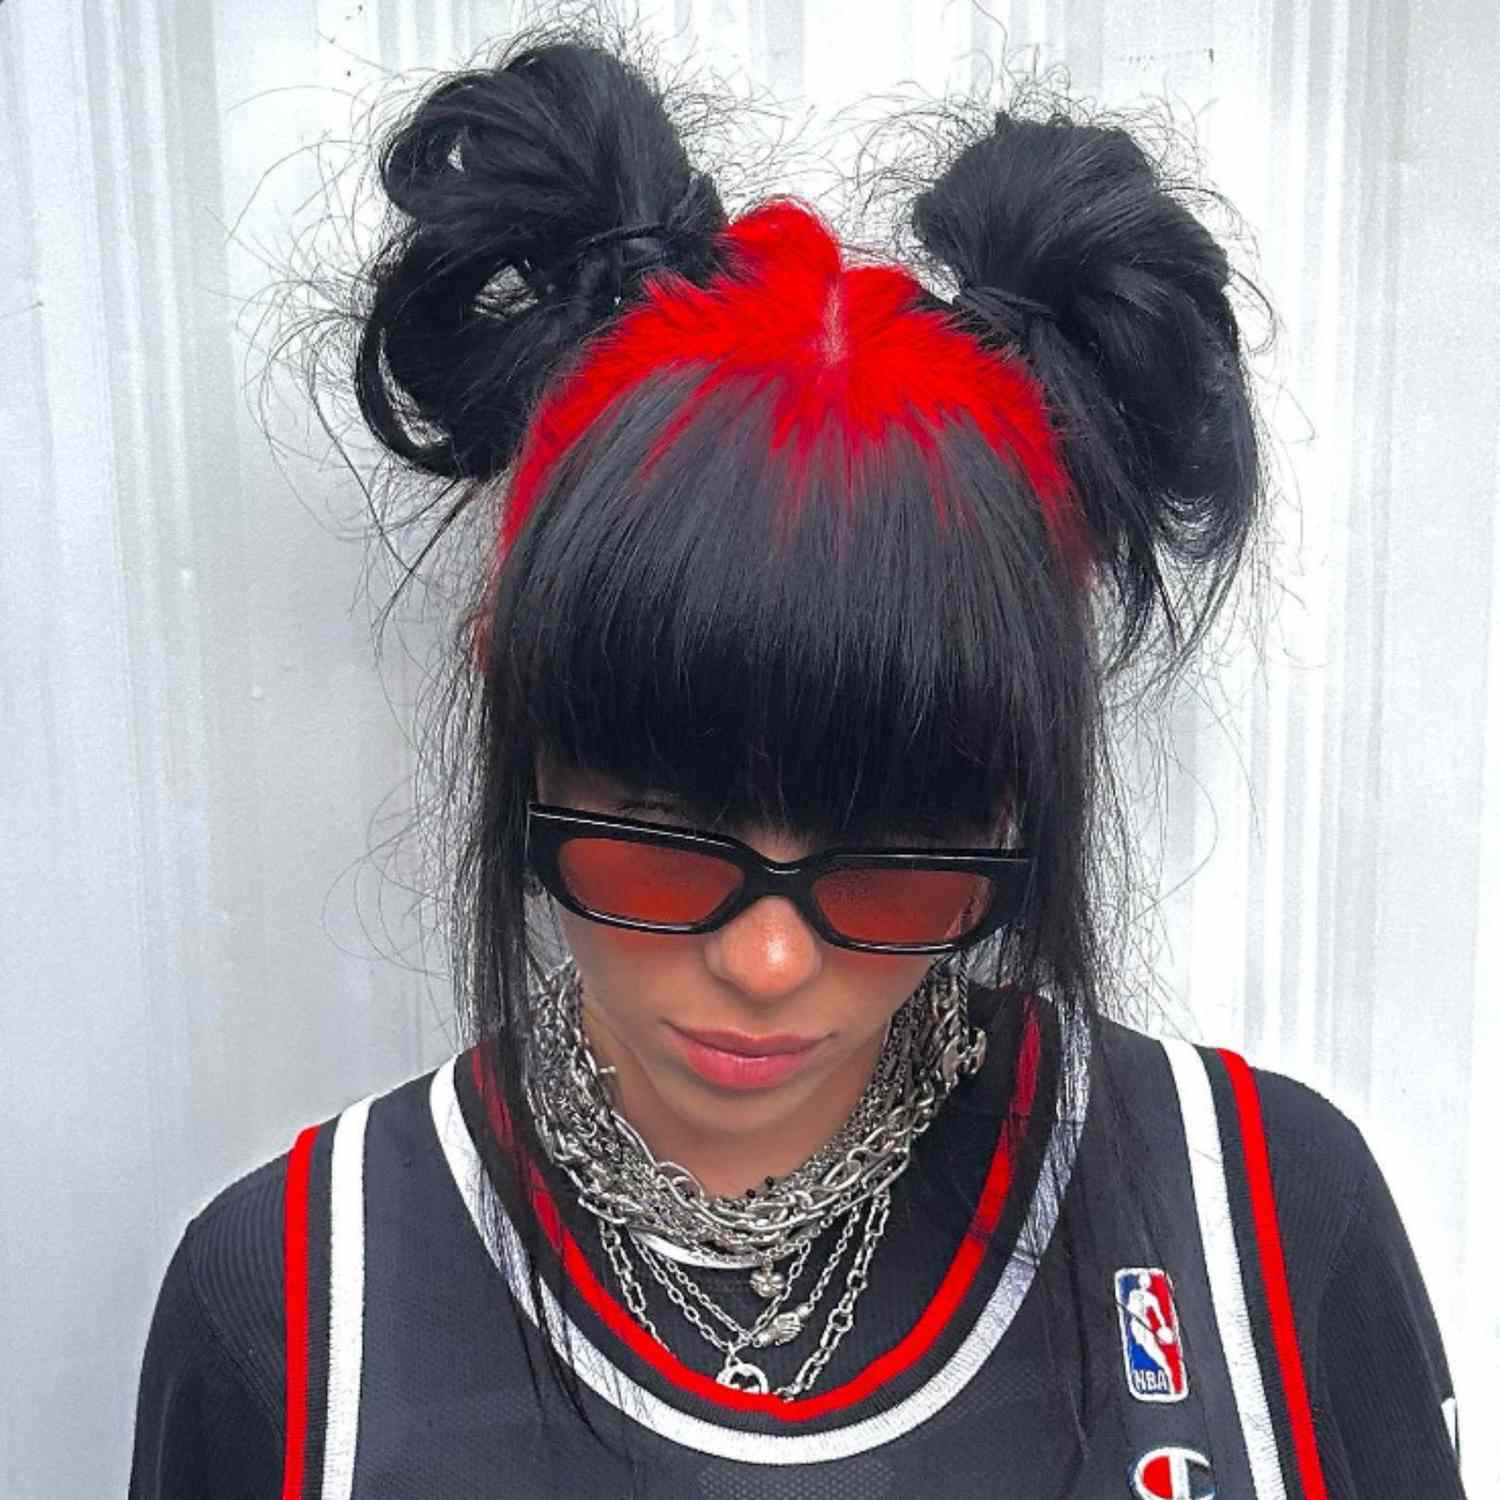 Billie Eilish wearing two space-bun pigtails with black and red hair.